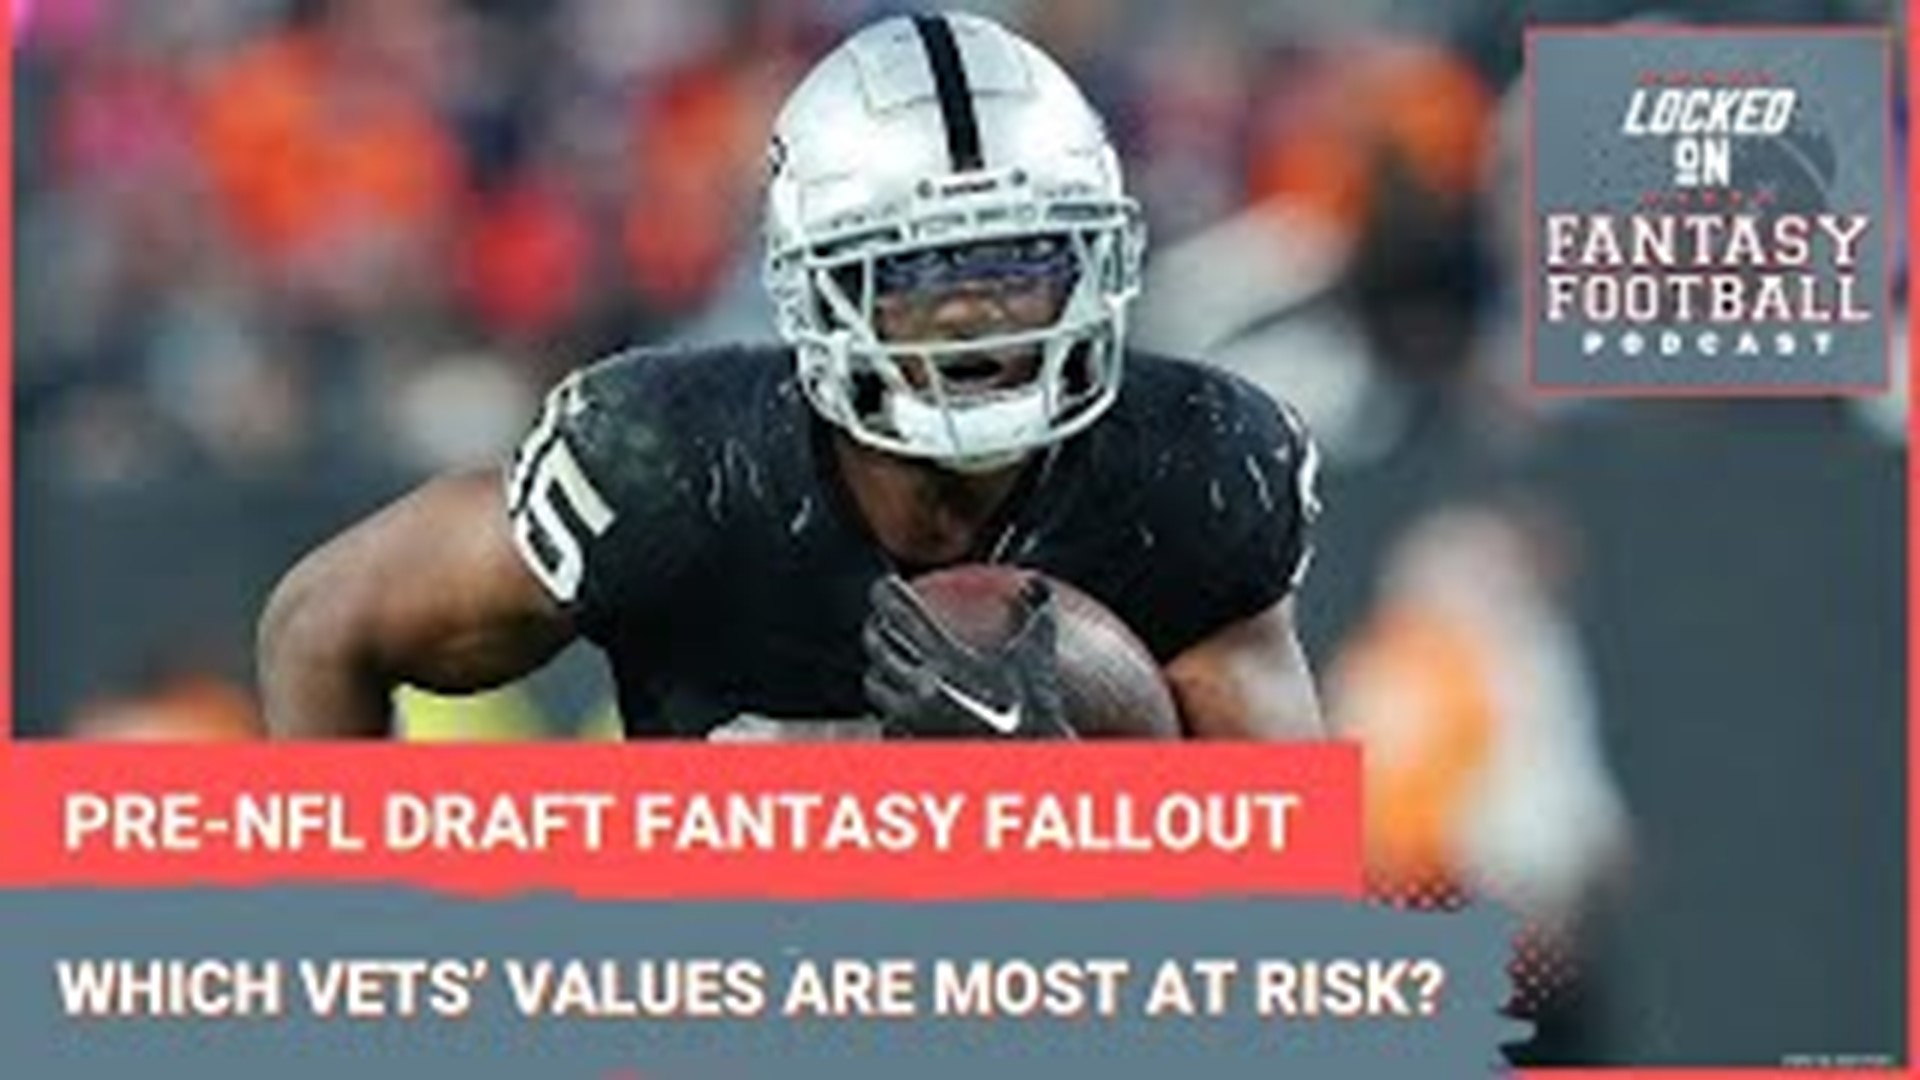 Sporting News.com's Vinnie Iyer and NFL.com's Michelle Magdziuk look at 16 total veterans at running back, wide receiver and tight end who are most at risk.